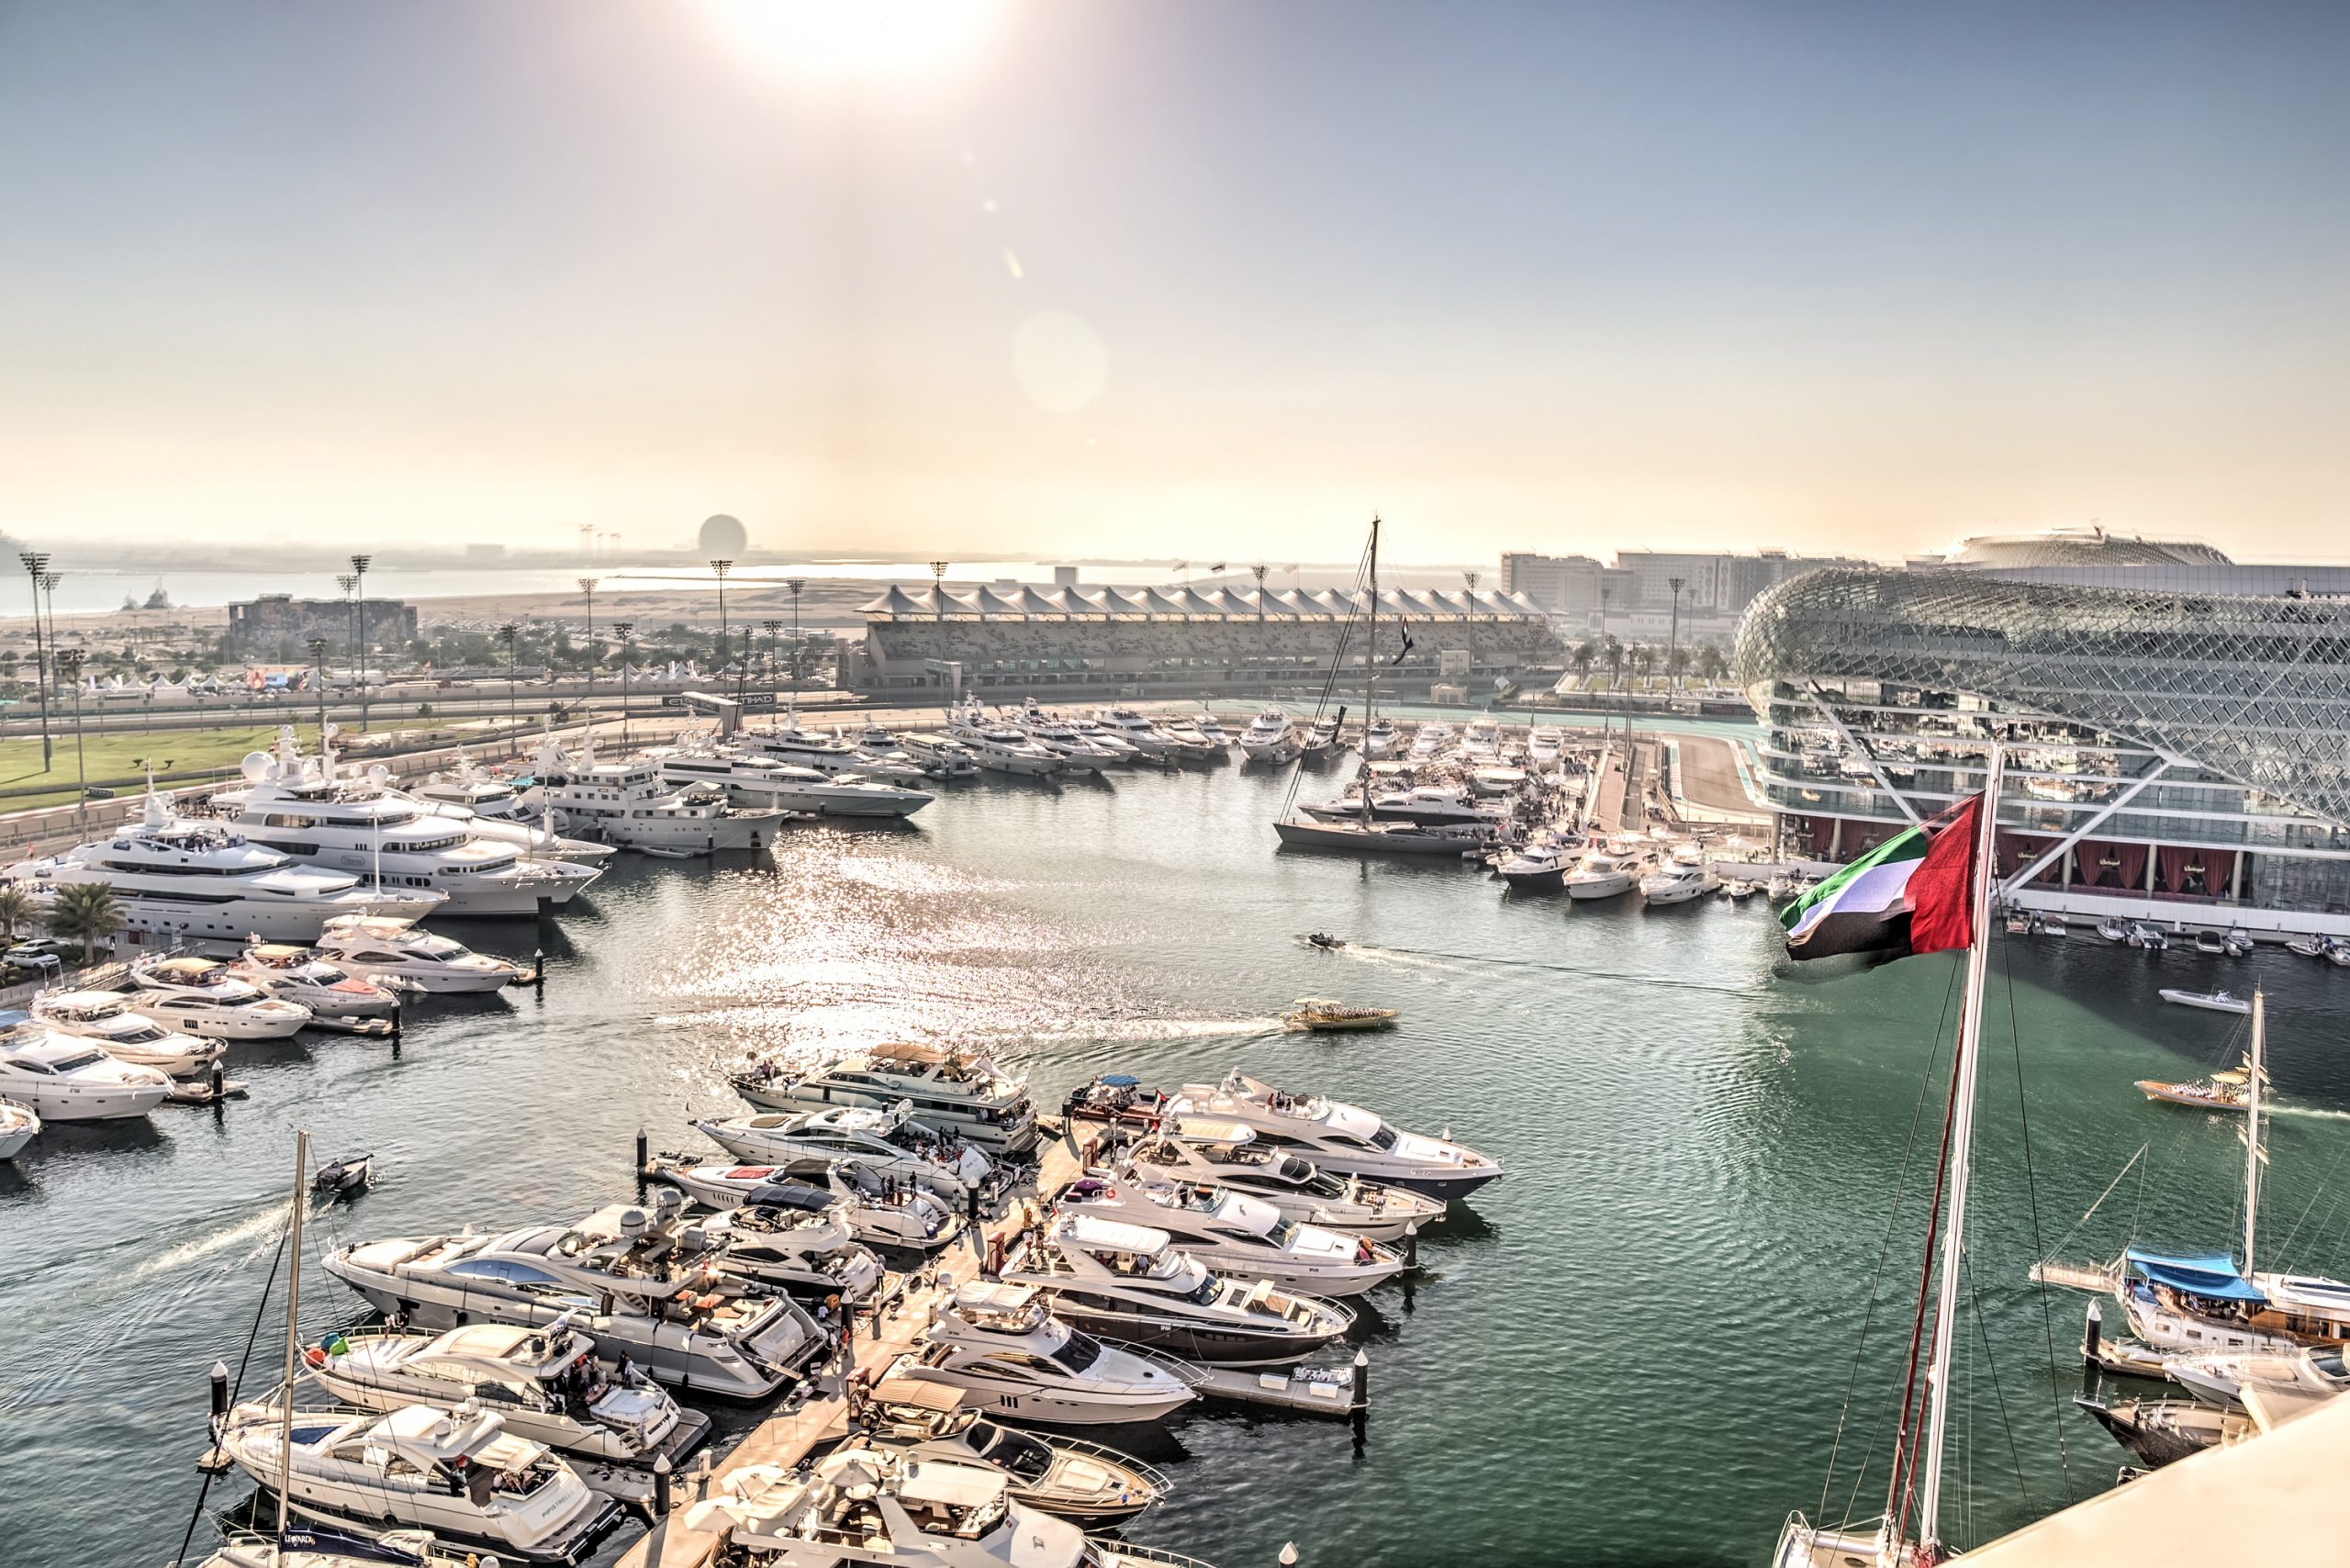 Yas Marina is gearing up to offer Race Week revellers an unrivalled atmosphere and world-class live entertainment from 17th – 20th November.